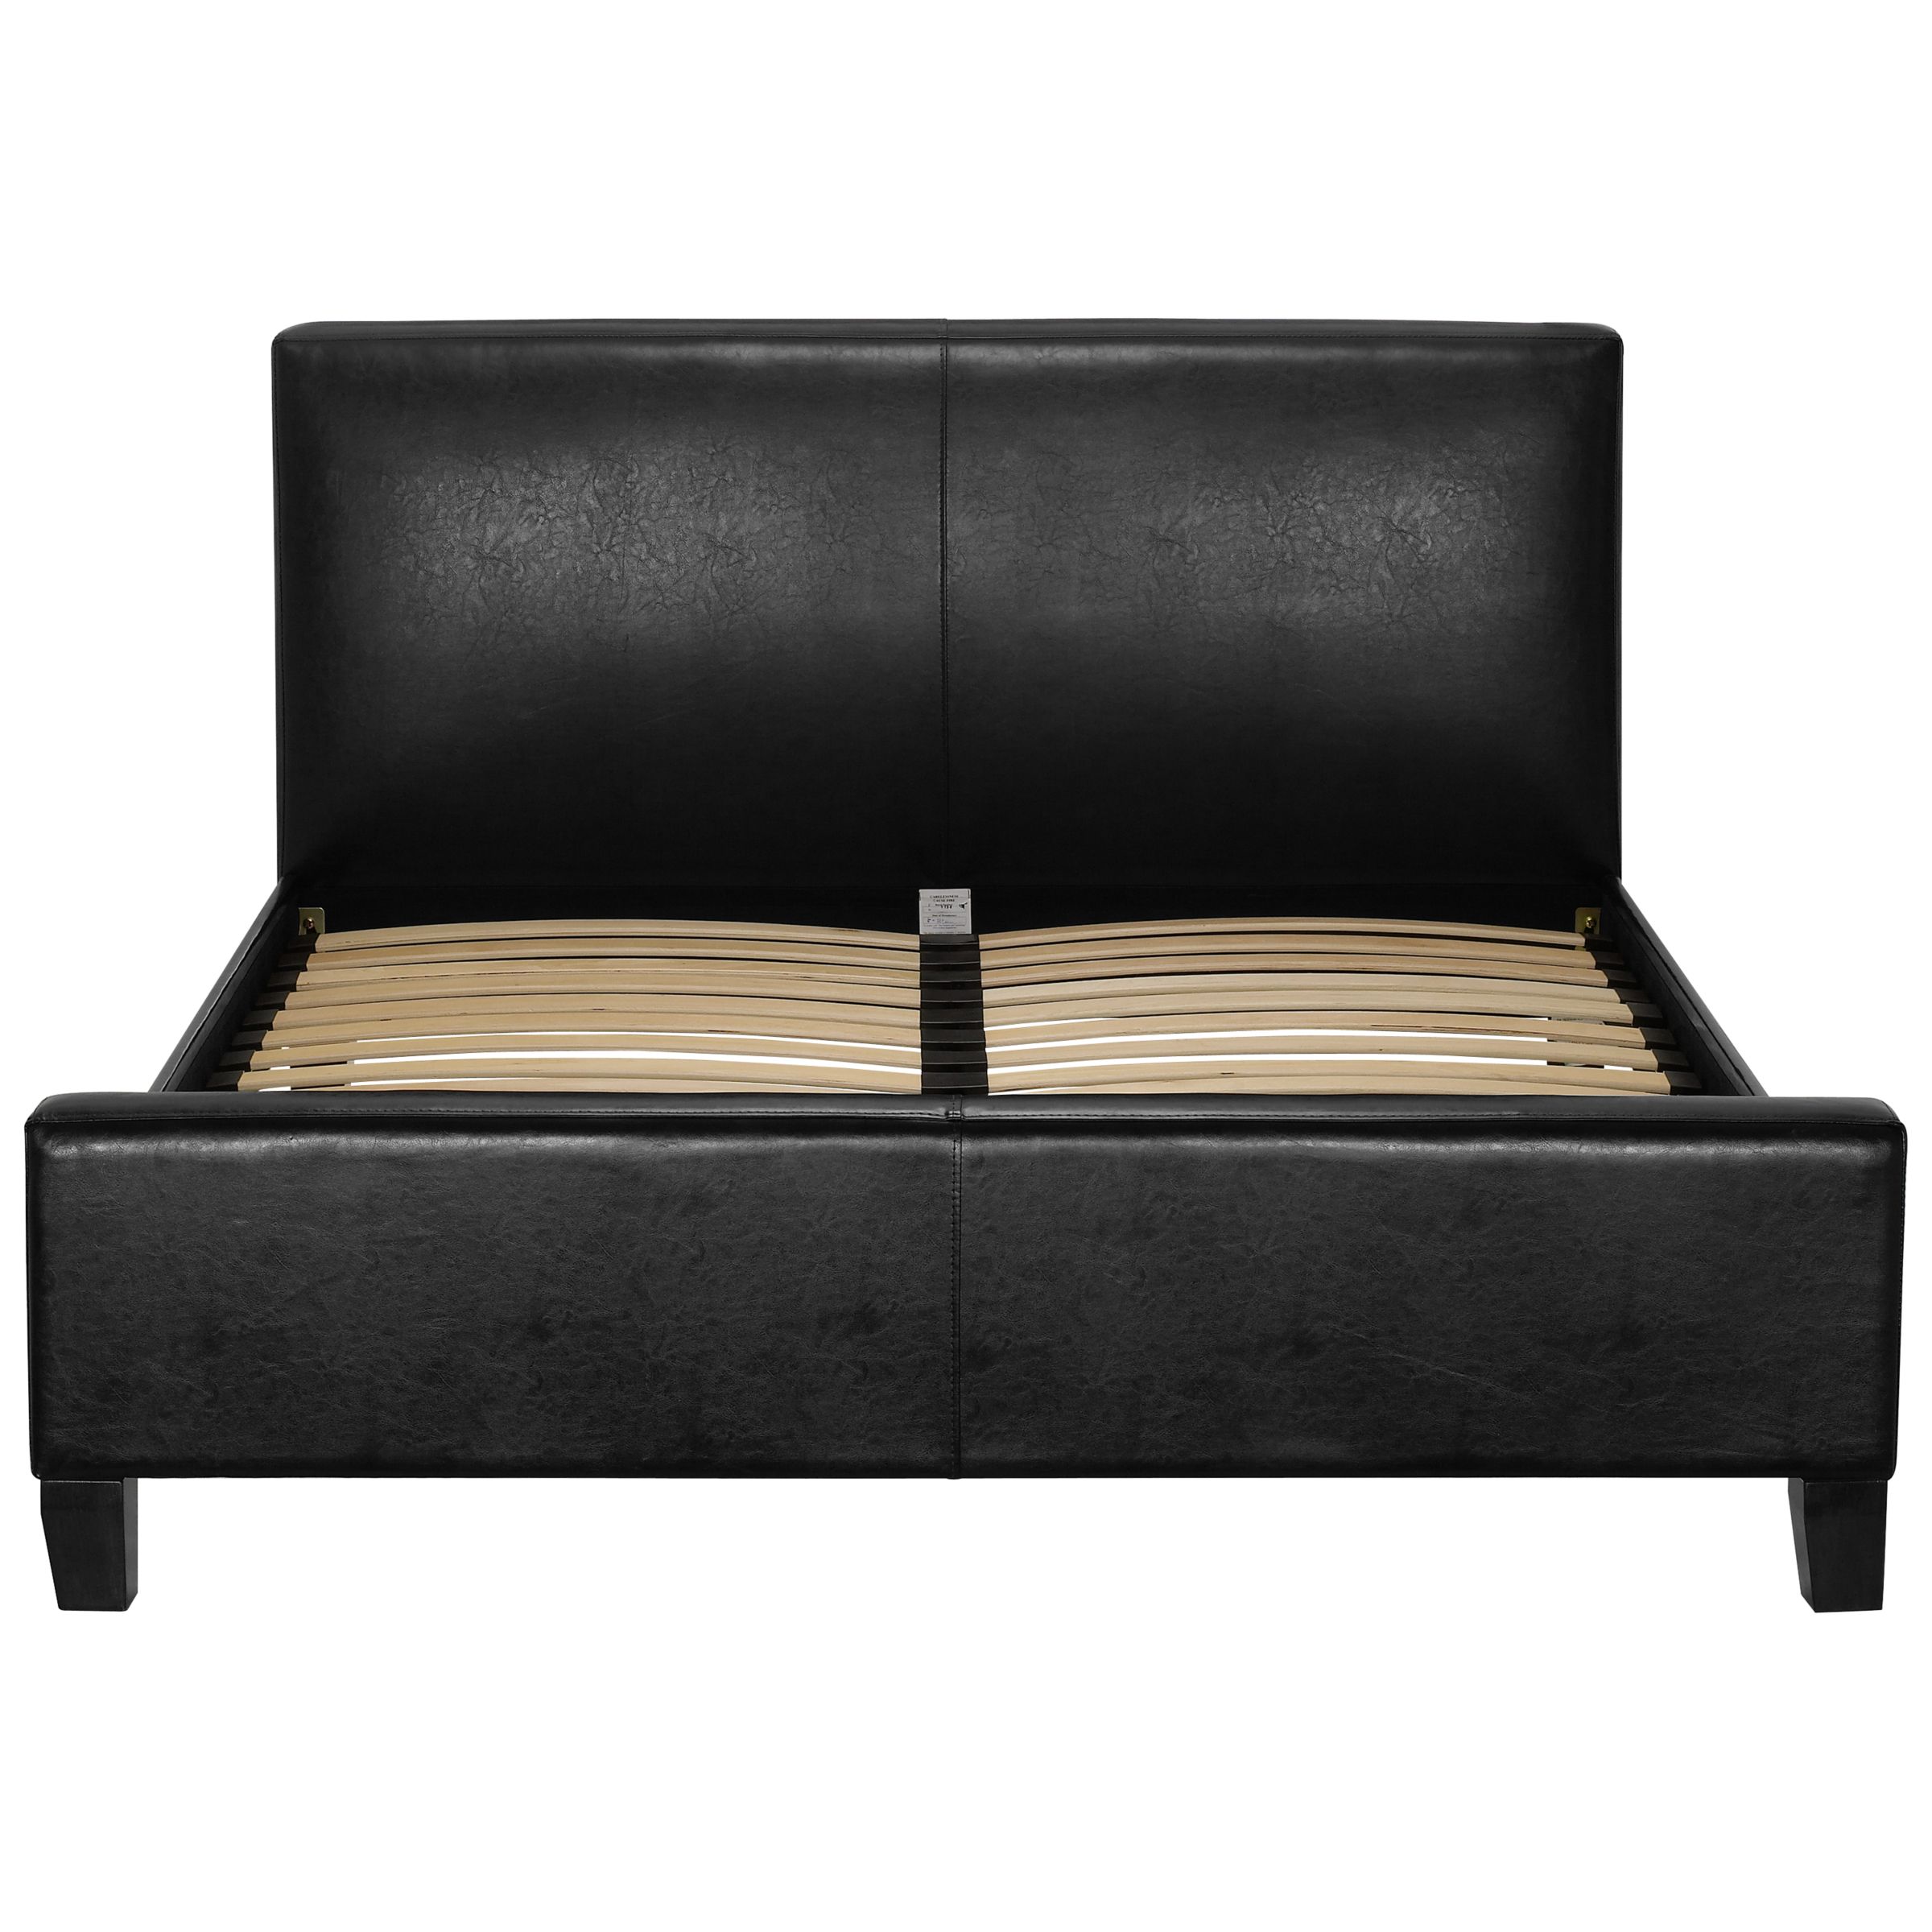 Calabria Faux Leather Bedstead, Black, Kingsize